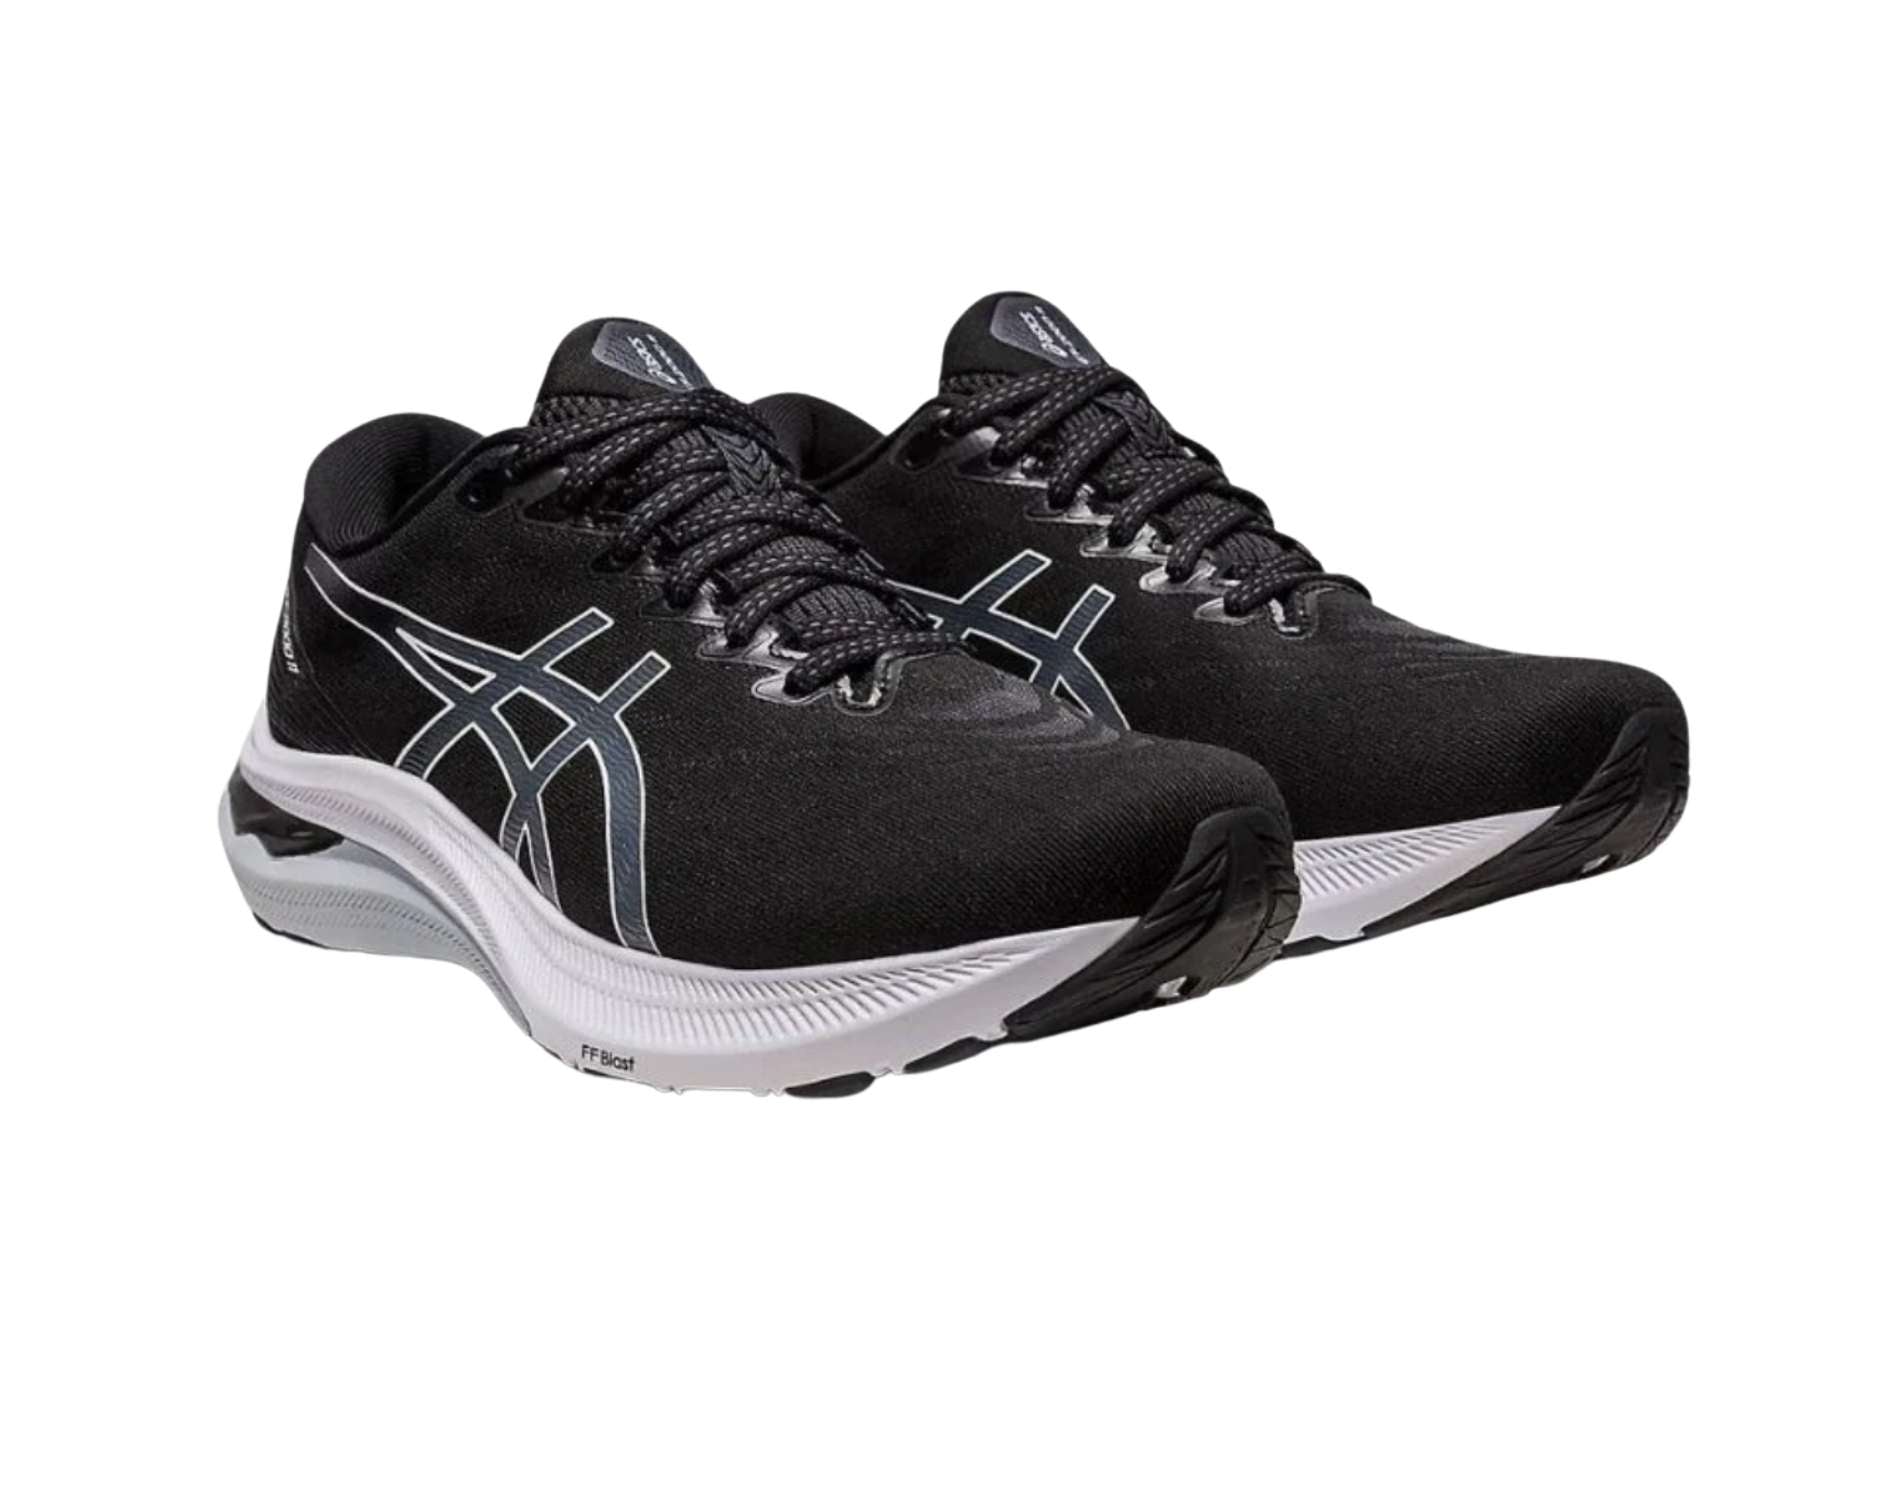 Asics GT 2000 11 Womens running shoe in narrow 2A width in black and white colour